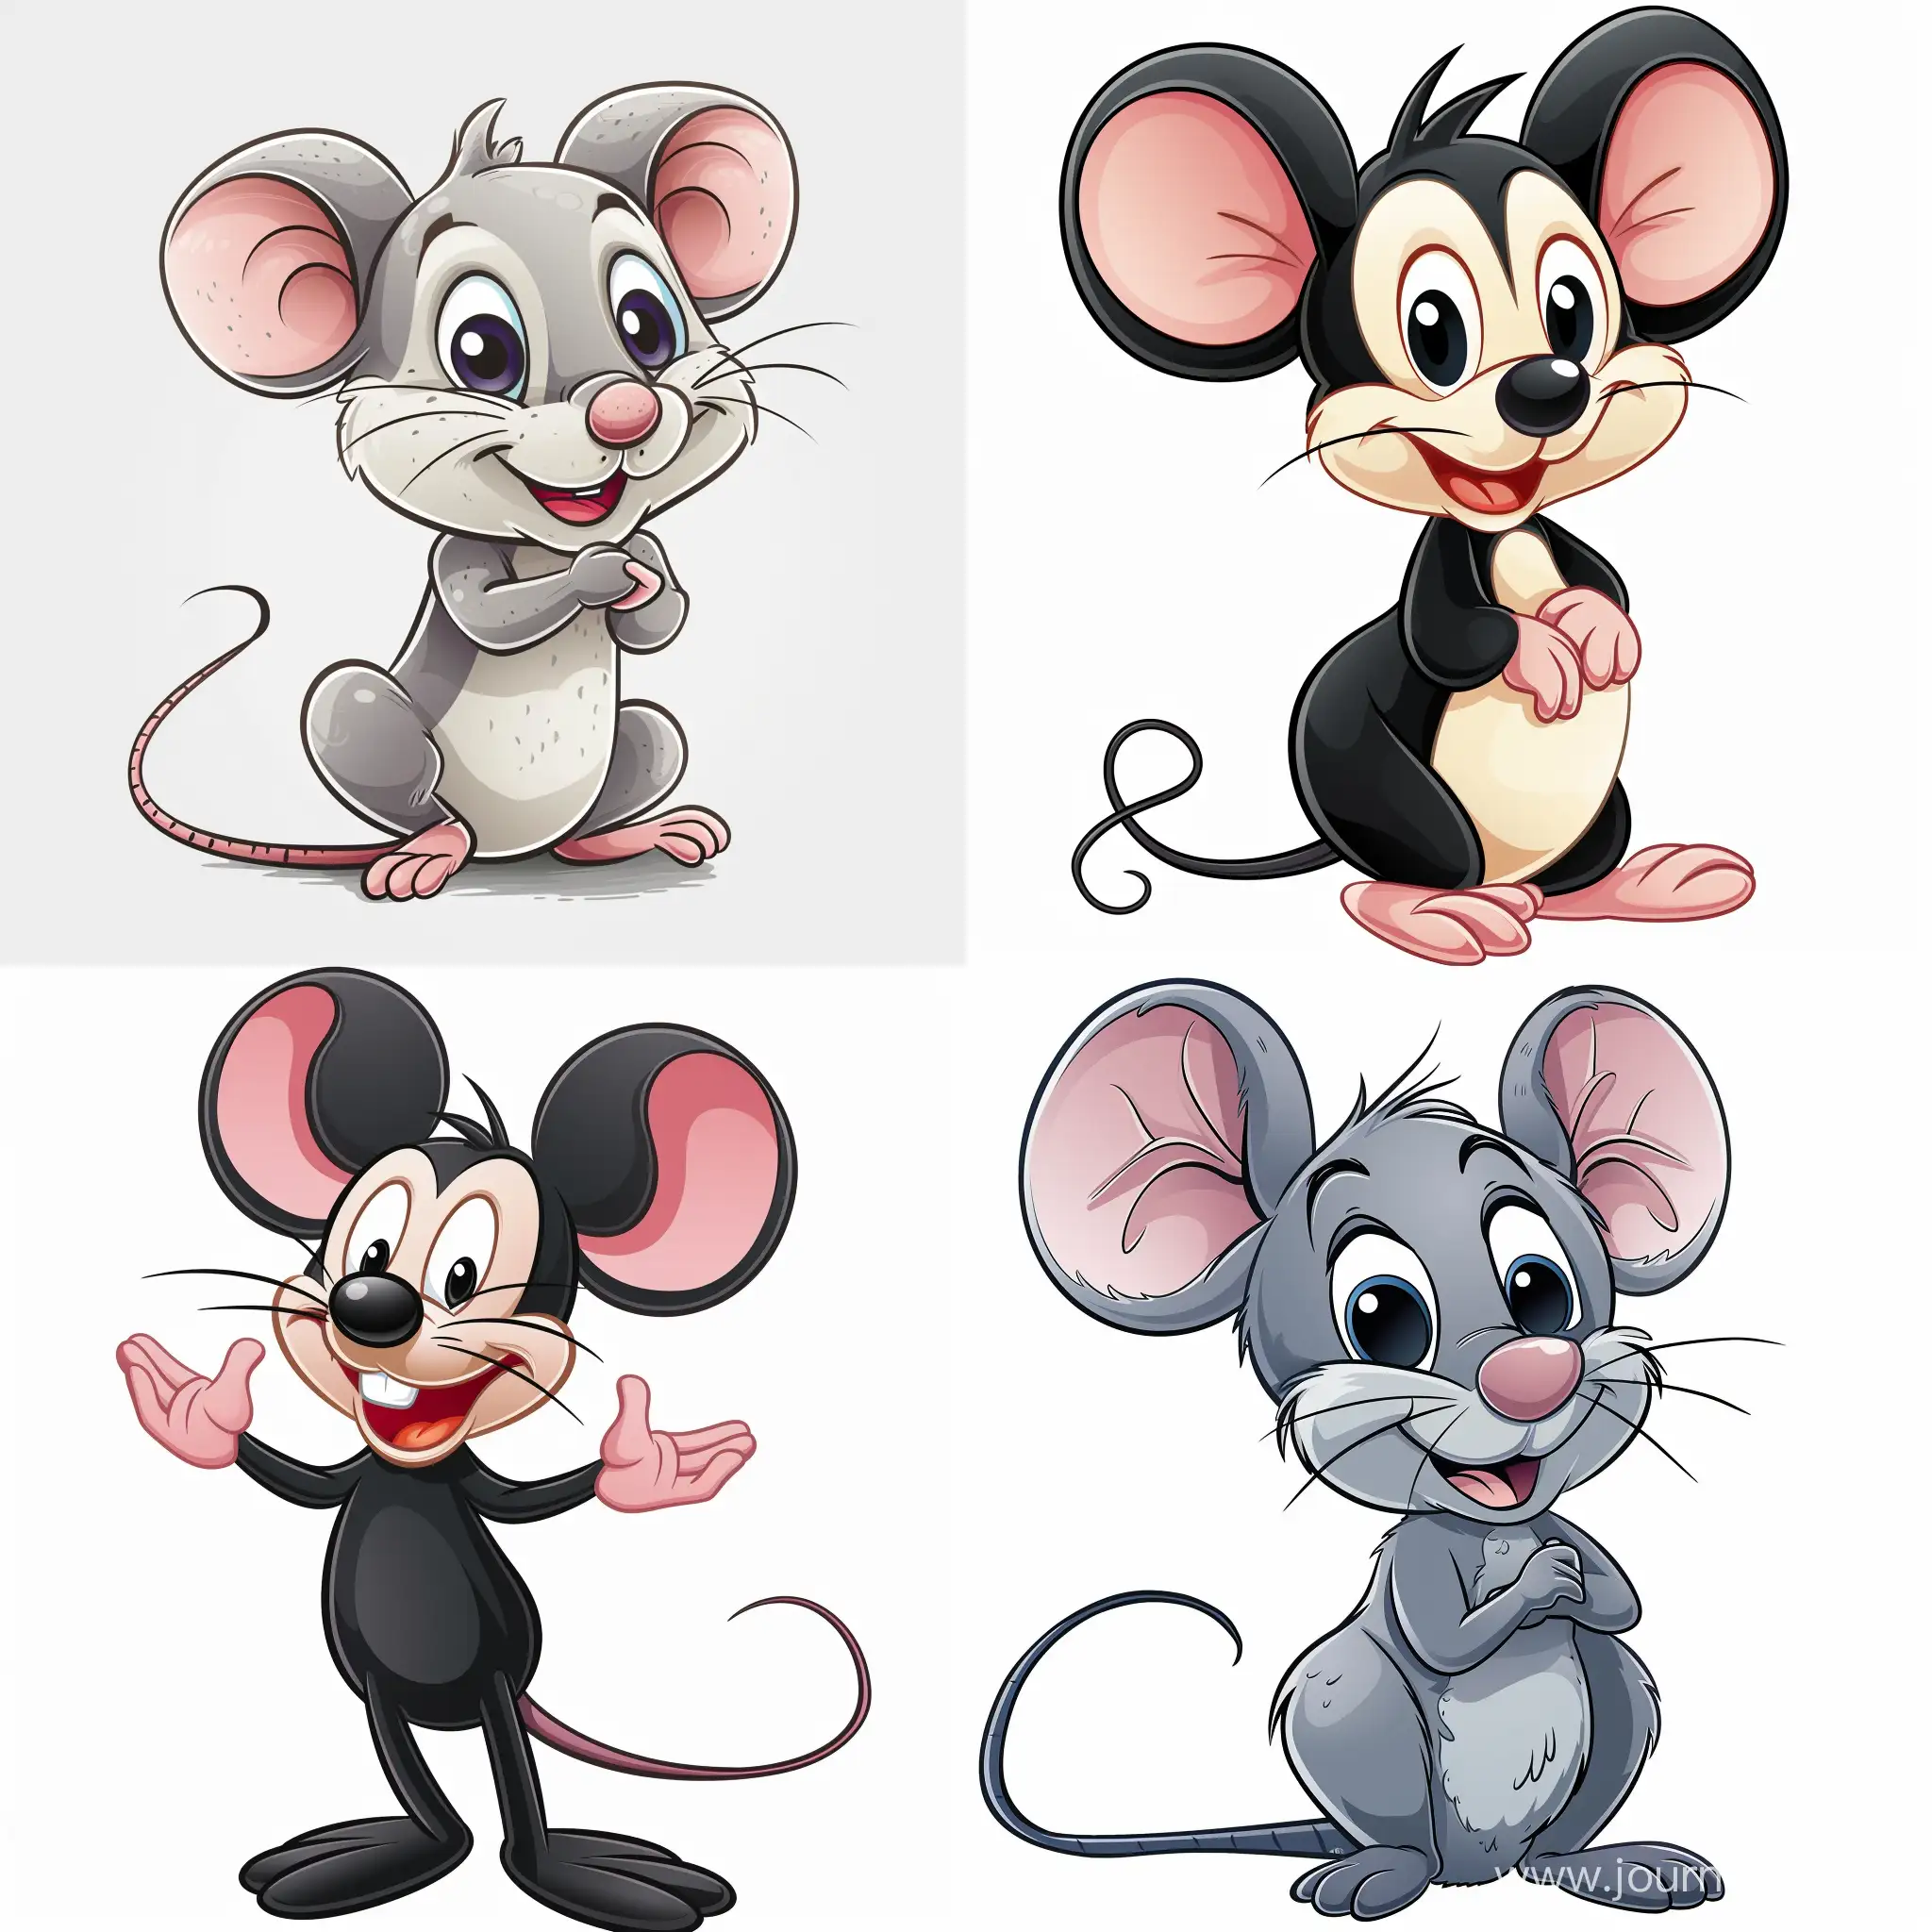 Whimsical-Cartoon-Mouse-in-Vibrant-Artistic-Display